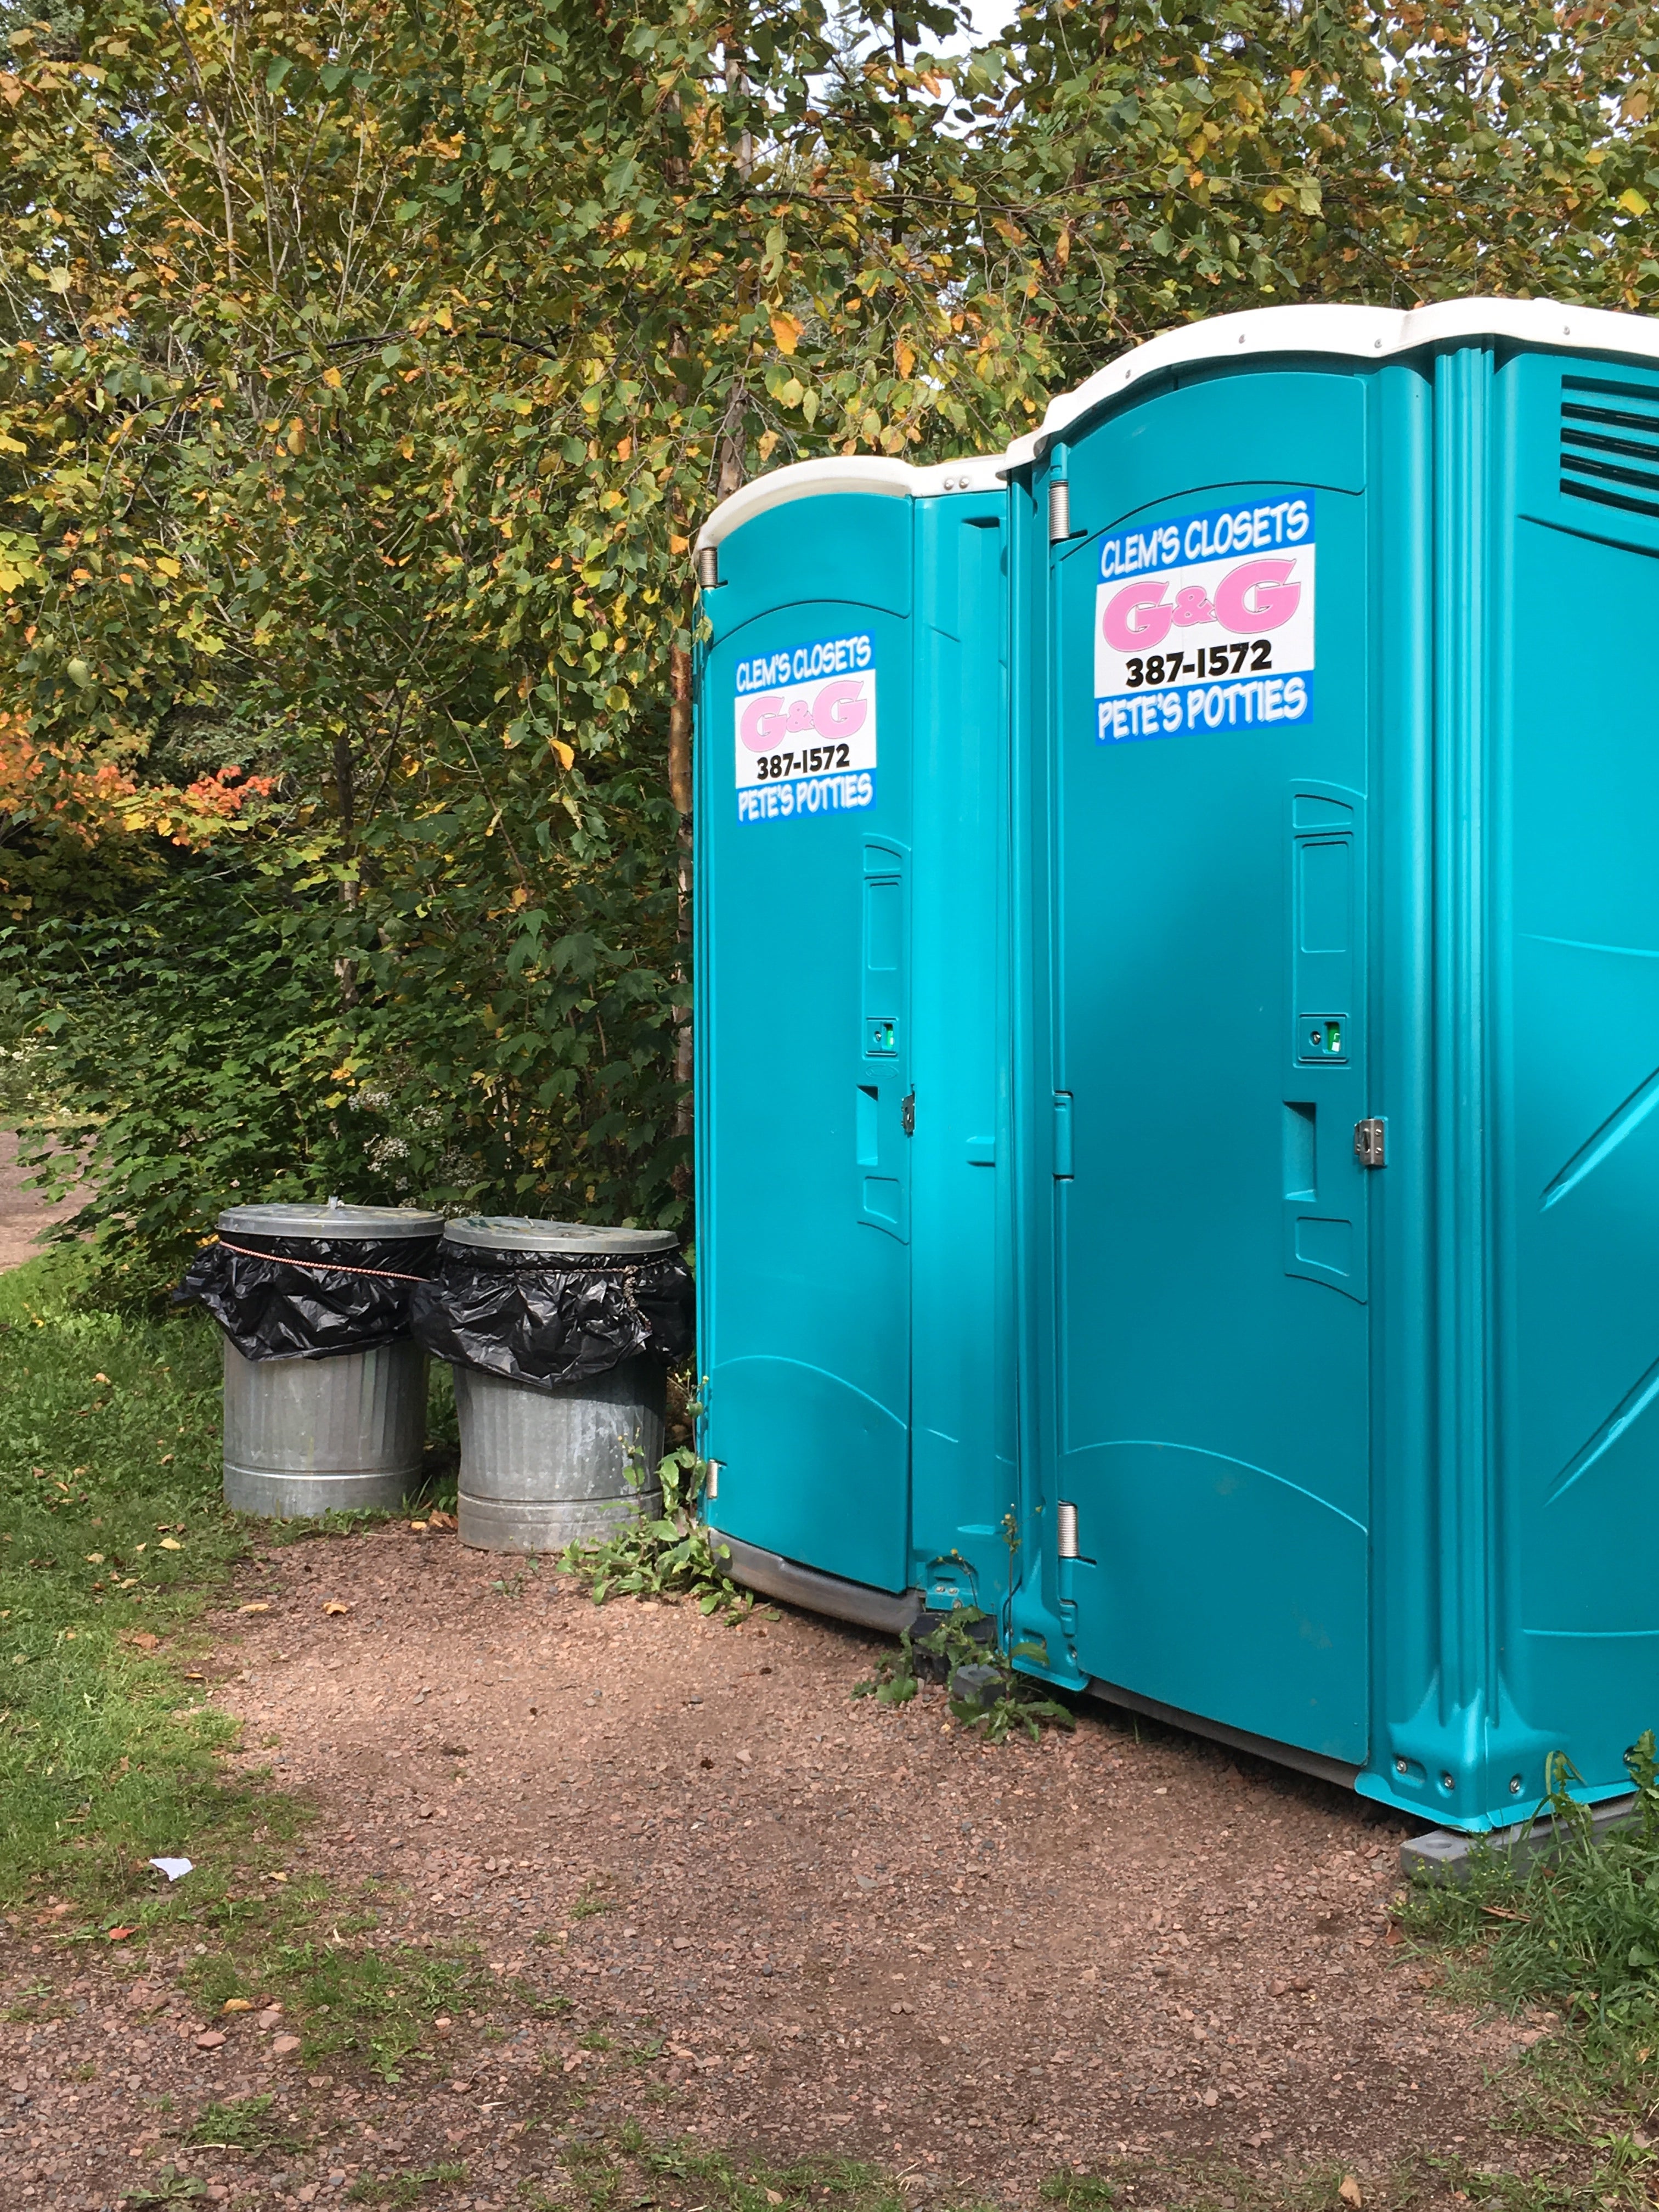 porta potties are closest, regular restrooms at bath house about 1/4 mile walk